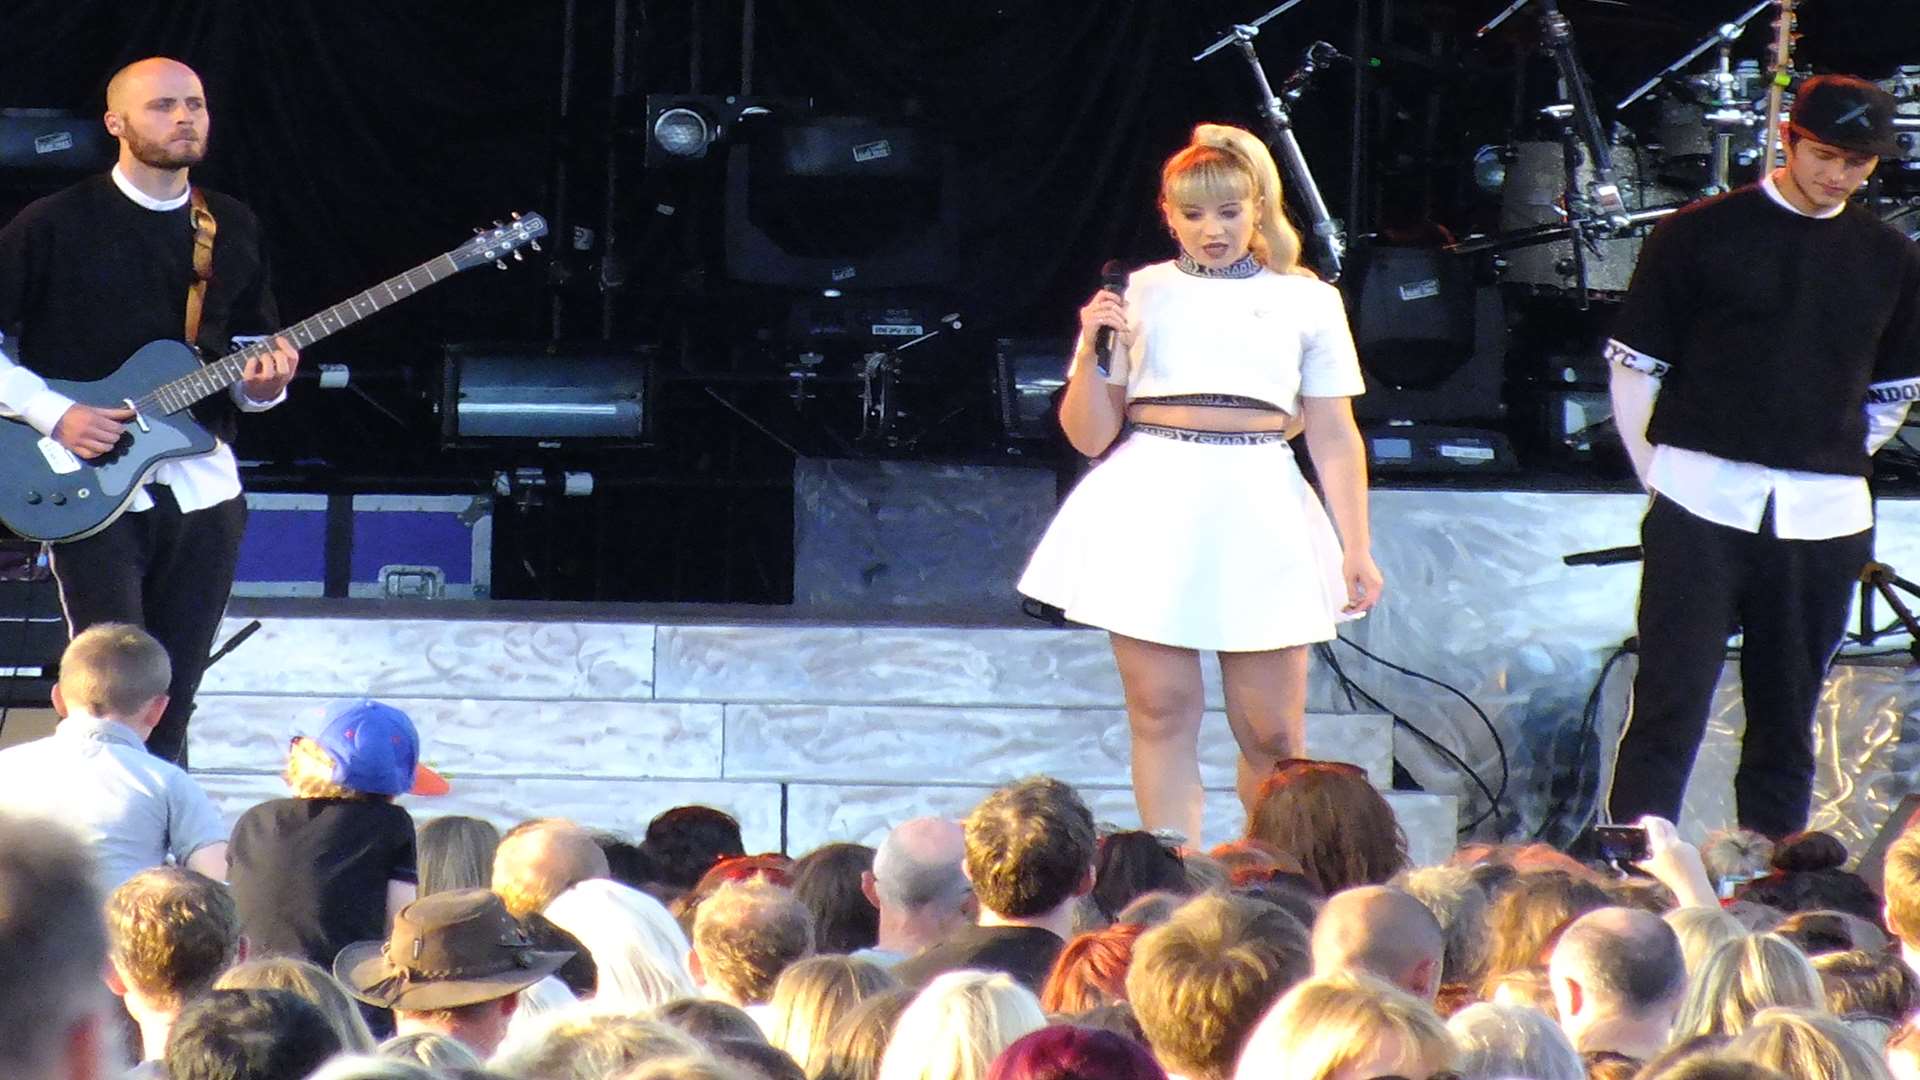 London-based singer-songwriter Leah McFall supporting Jessie J at Bedgebury Pinetum